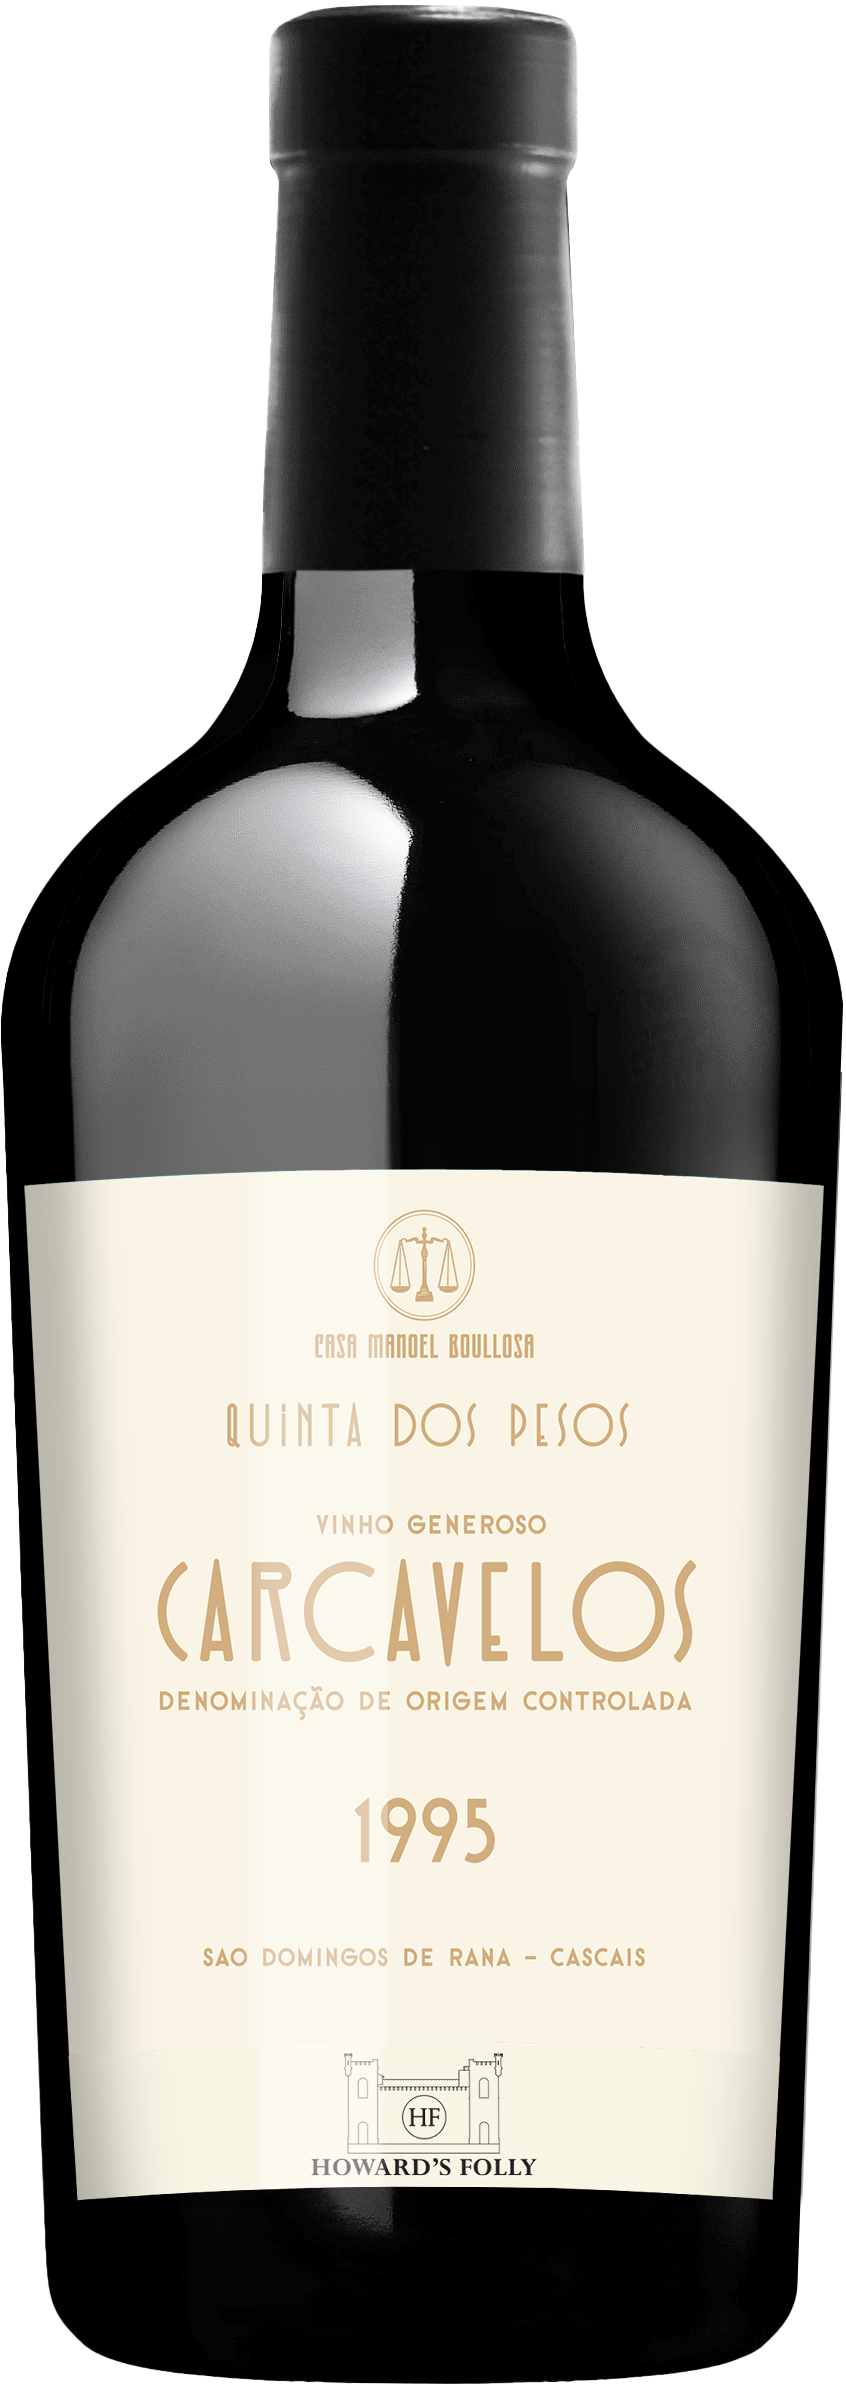 1995 Carcavelos, Case of 3